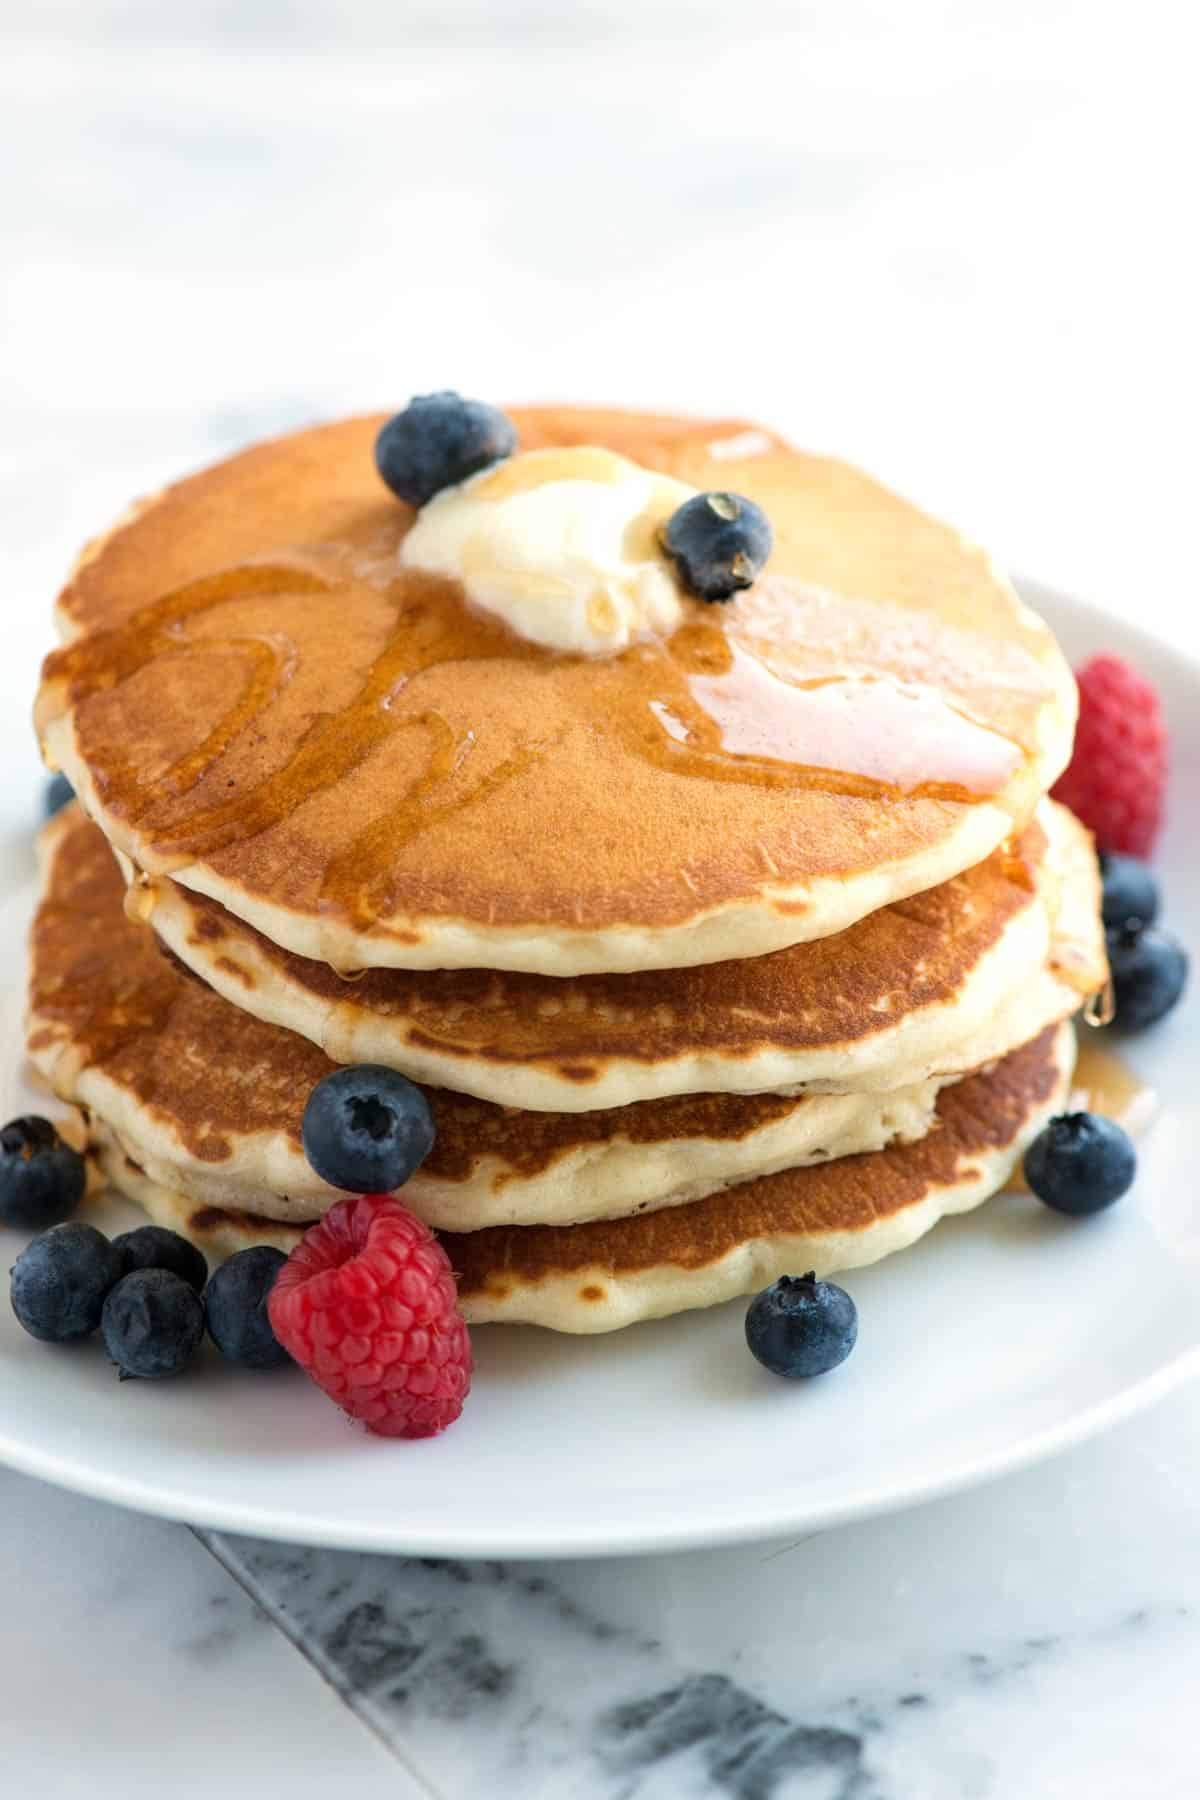 How To Cook Pancakes
 Easy Fluffy Pancakes Recipe from Scratch